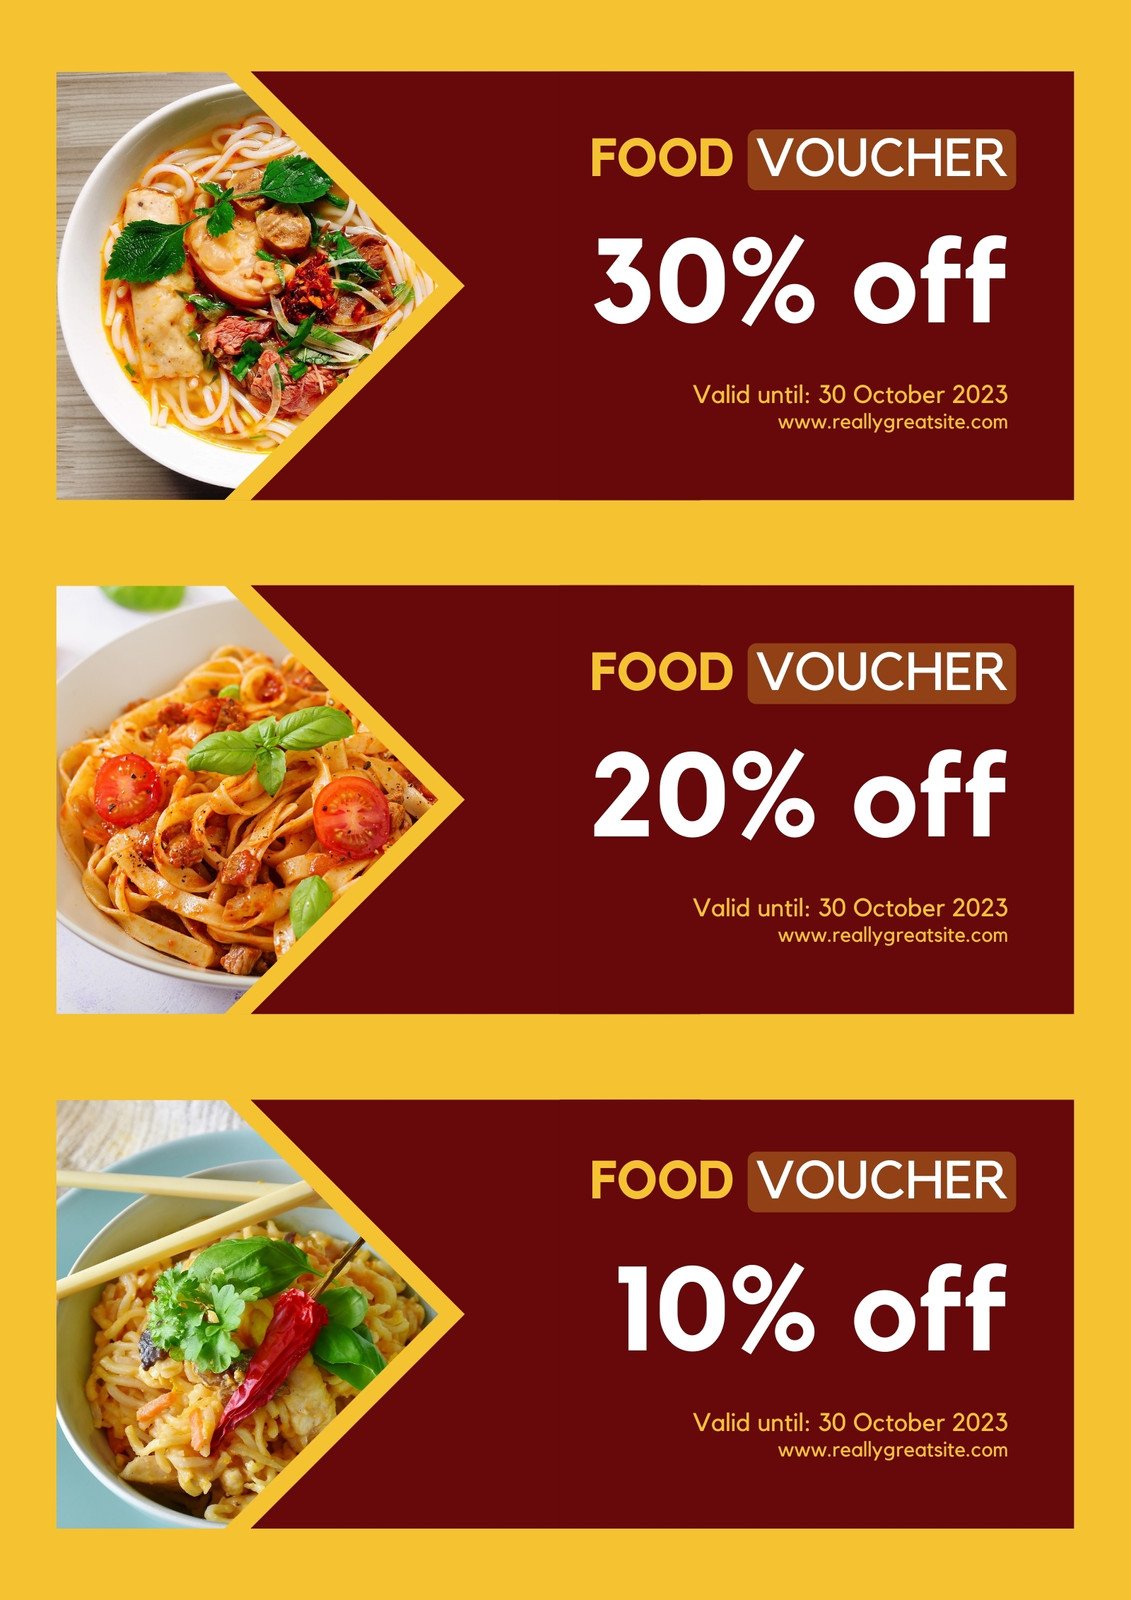 Coupon for discounted food